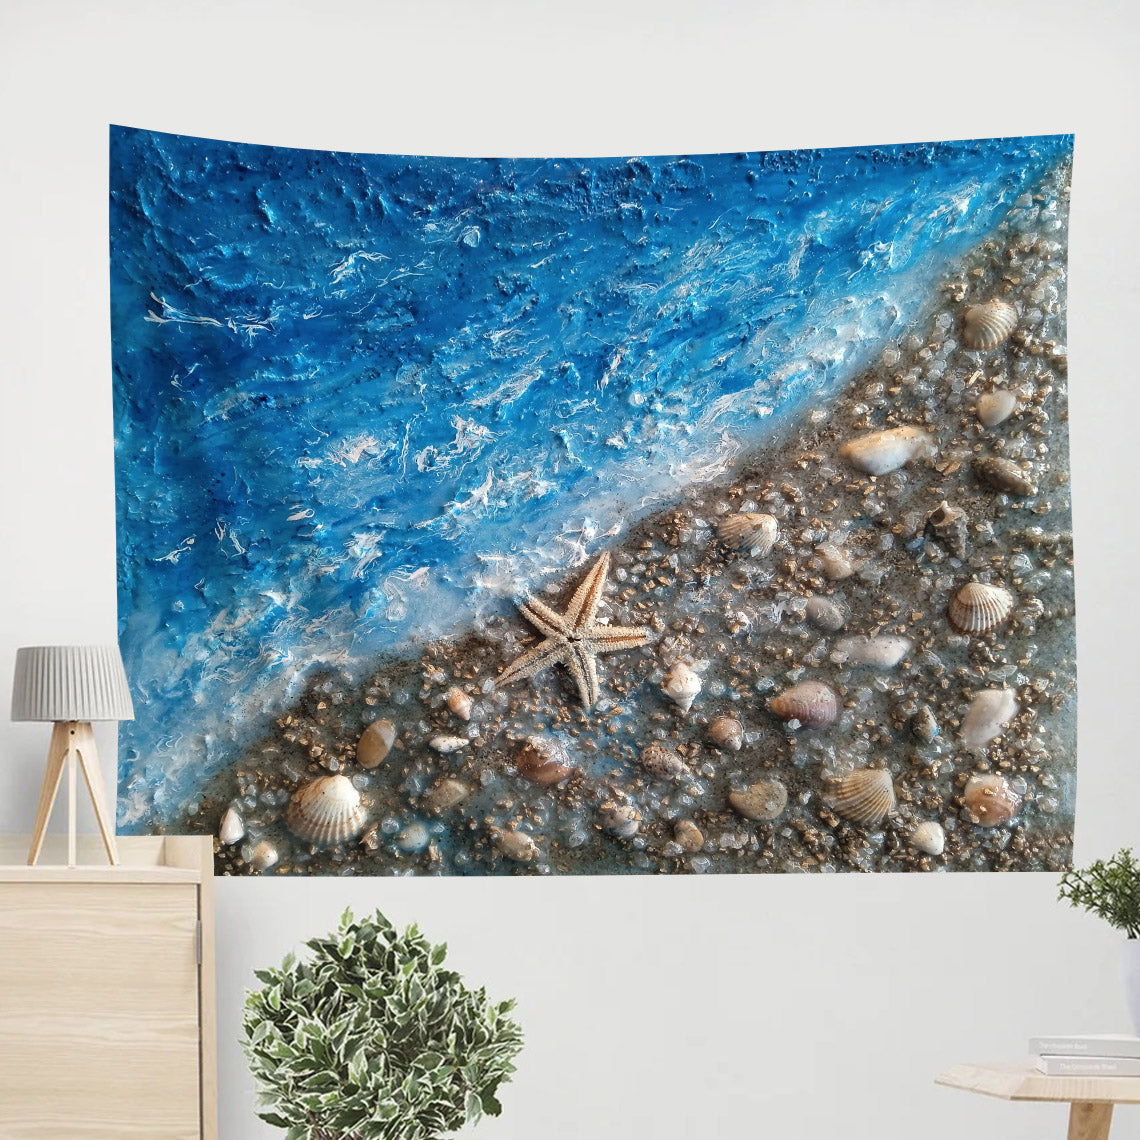 Seashells With Epoxy Resin Painting Tapestry - Tapestry Wall Decor - Home Decor Living Room